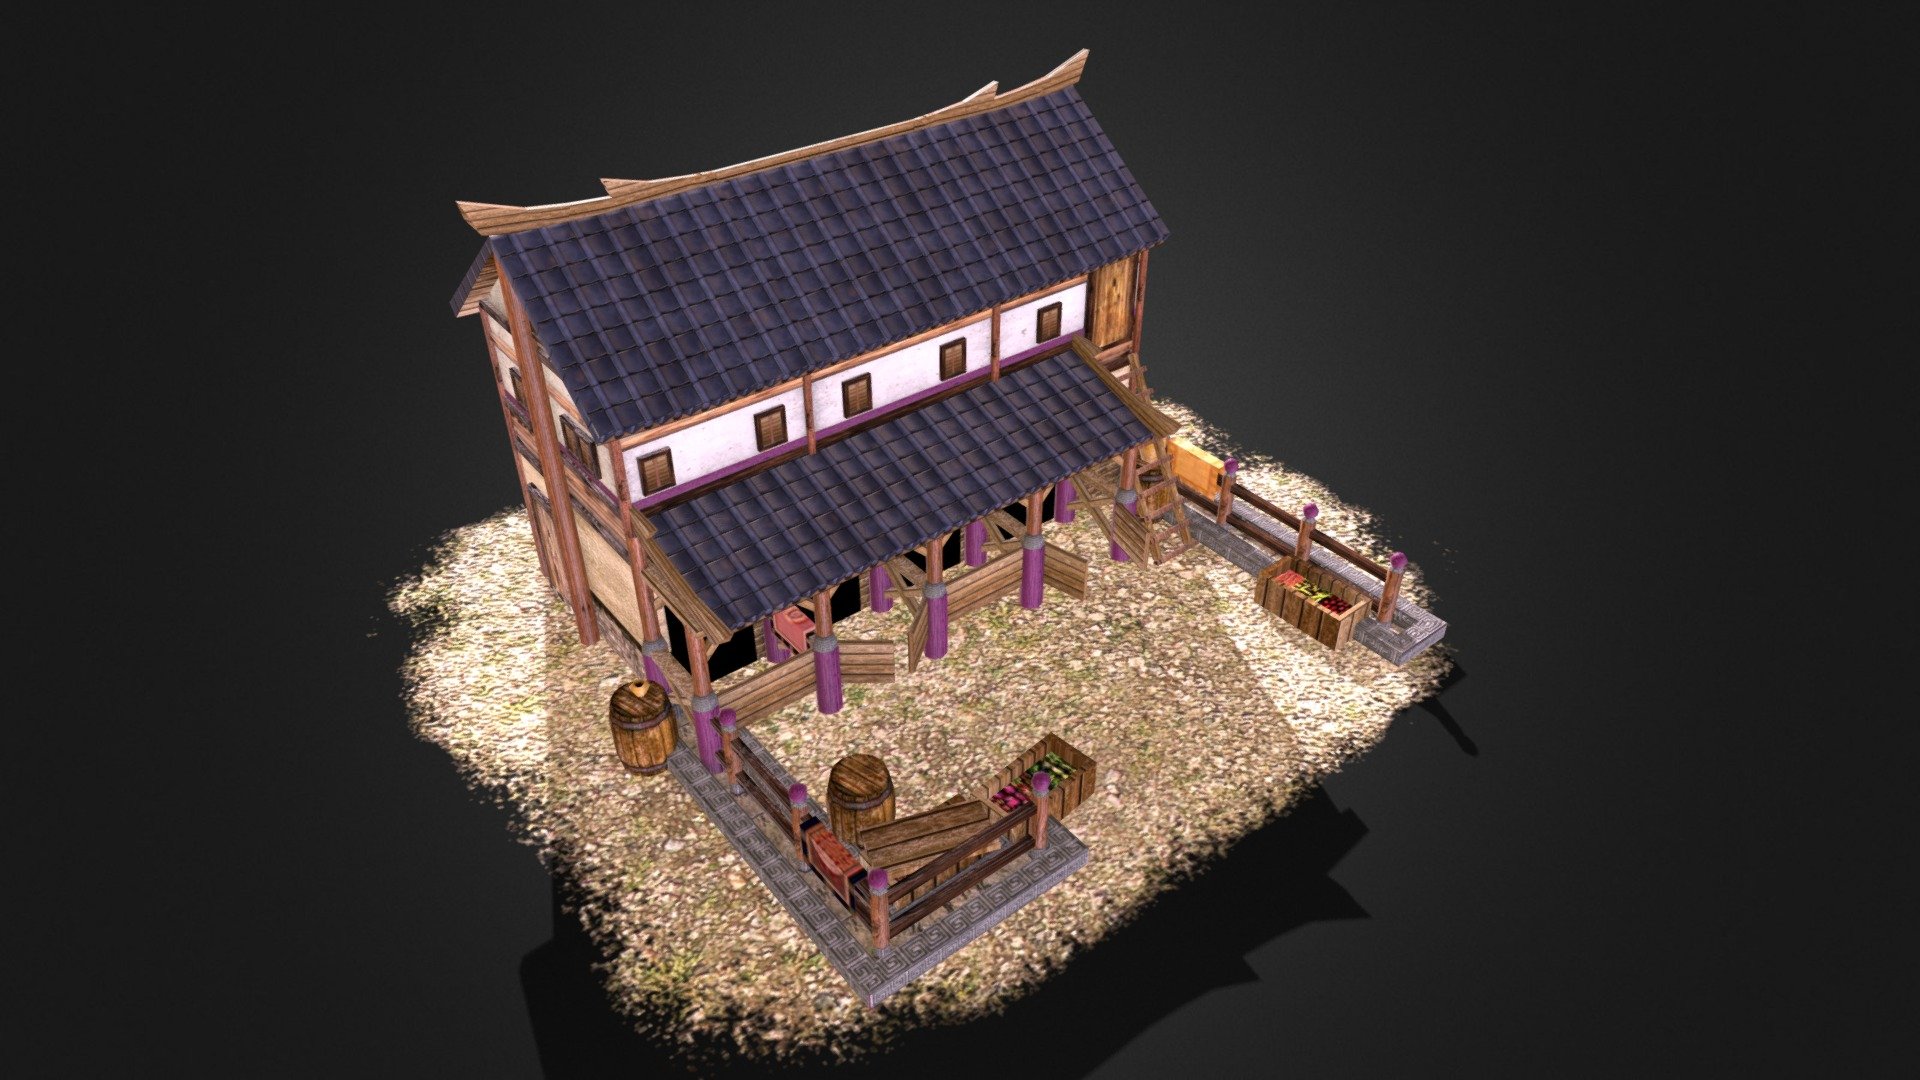 Han Dynasty inspired model to serve as a stable for the Terra Magna mod, a mod for 0 A.D. (https://play0ad.com/) - Han Dynasty Stable - 3D model by Stanislas Dolcini (@StanislasDolcini) 3d model